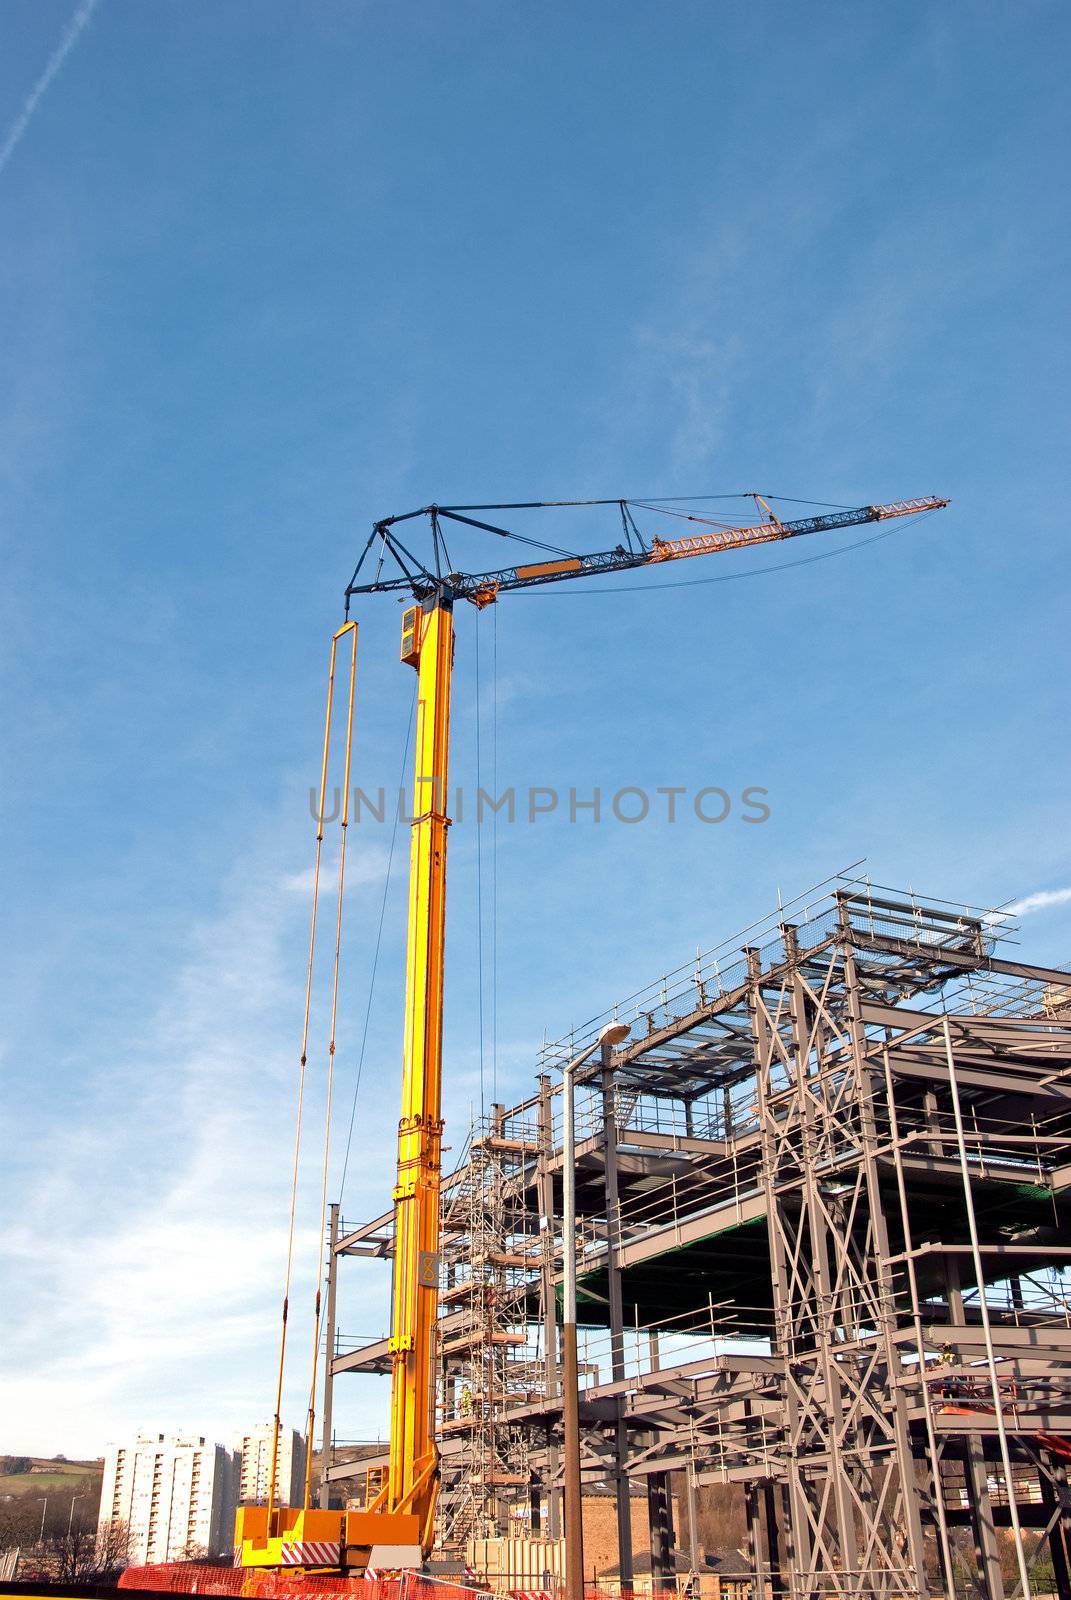 Tower Crane and Steelwork by d40xboy